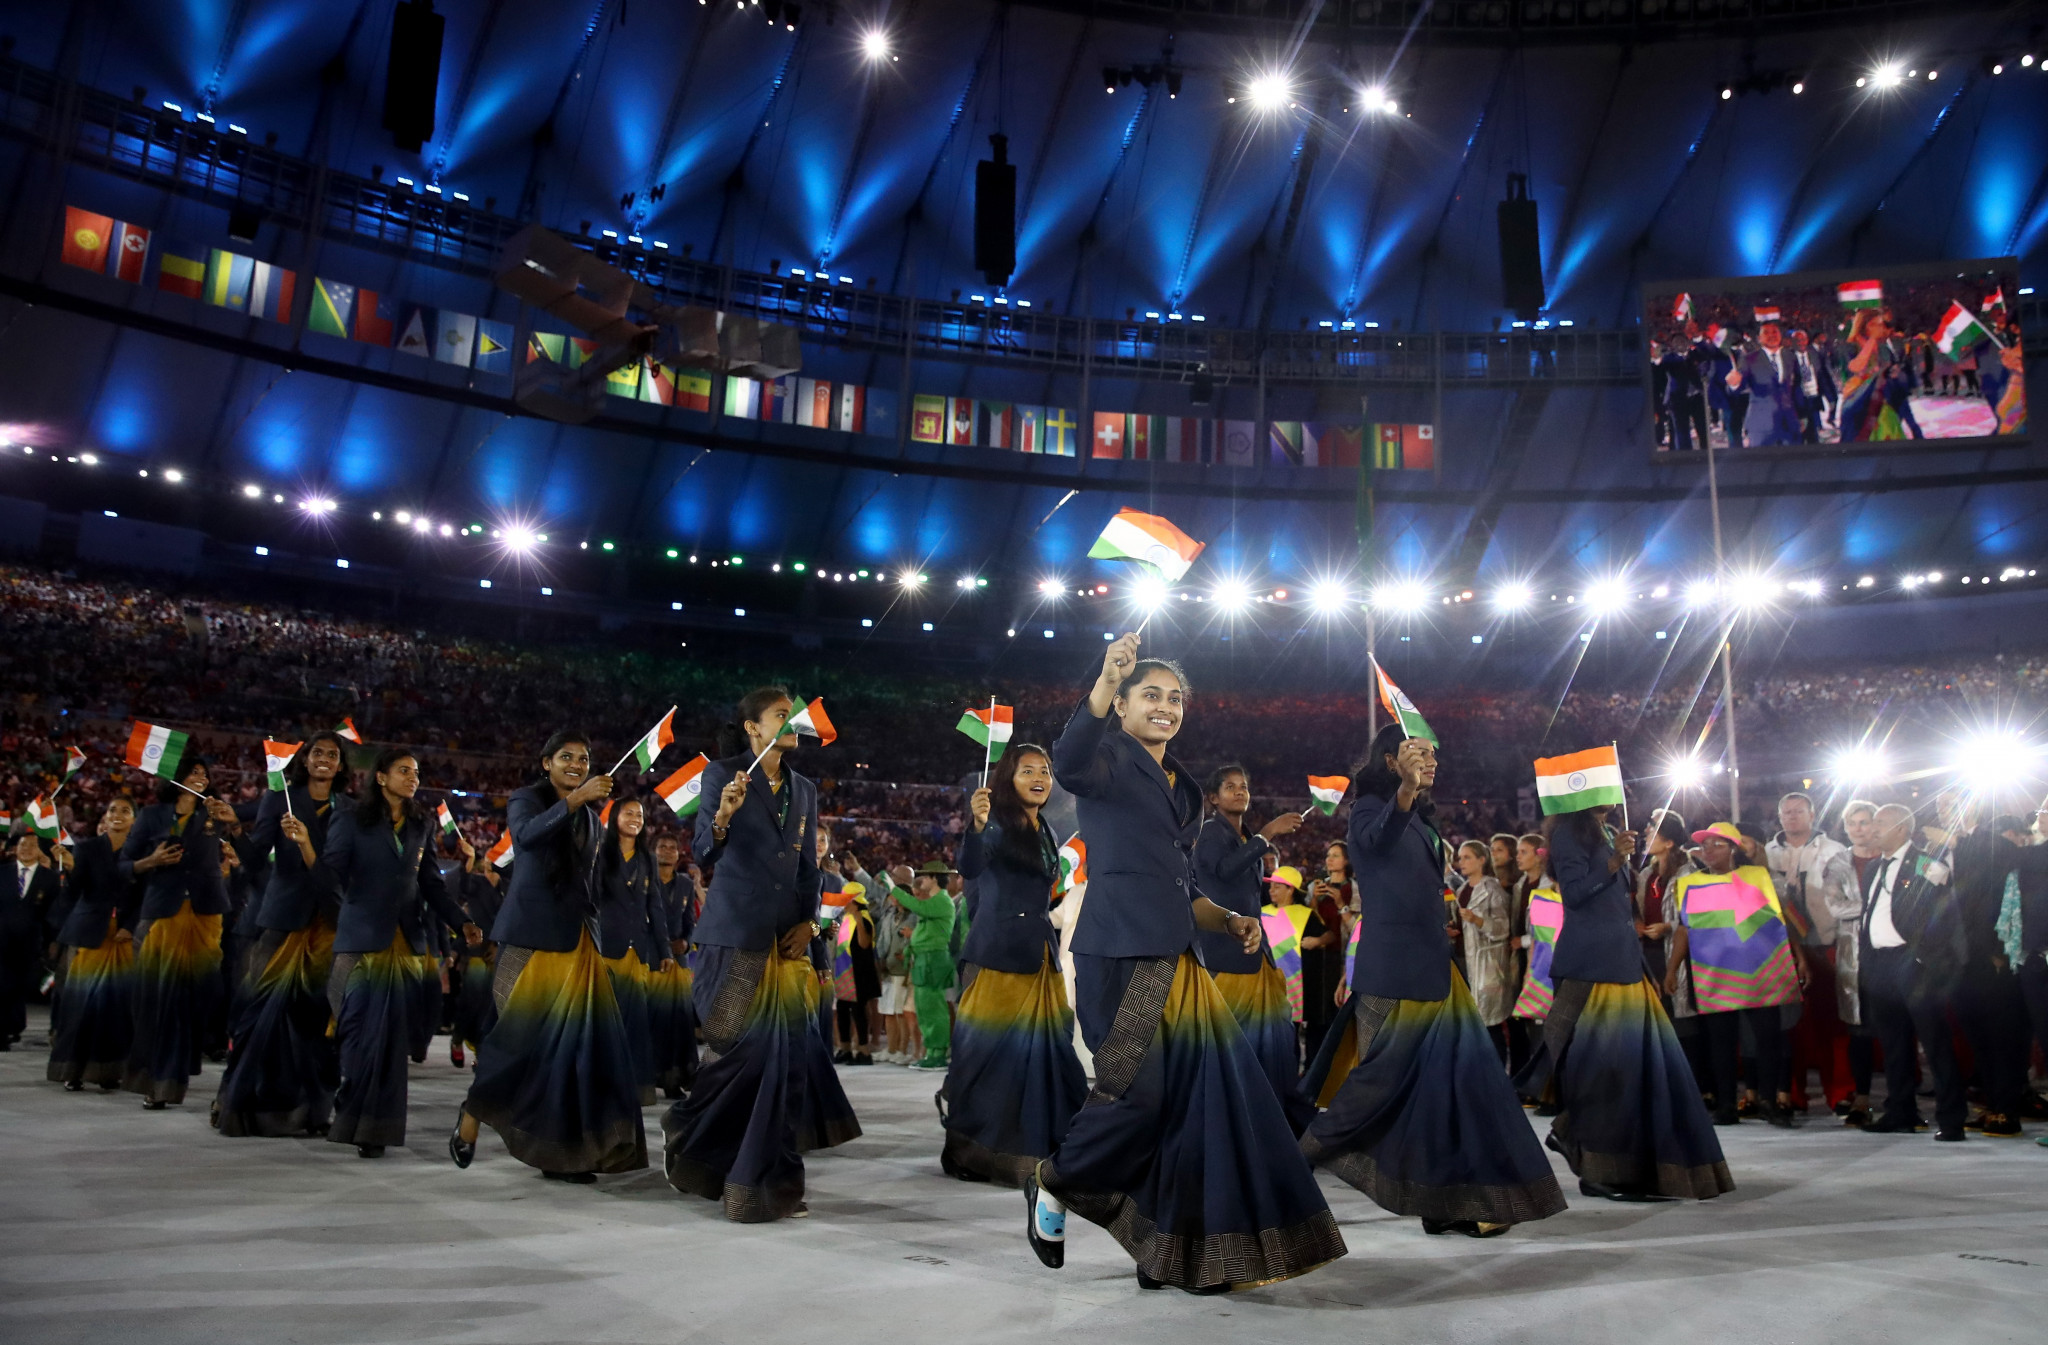 Indian female athletes have worn saris at past Opening Ceremonies ©Getty Images